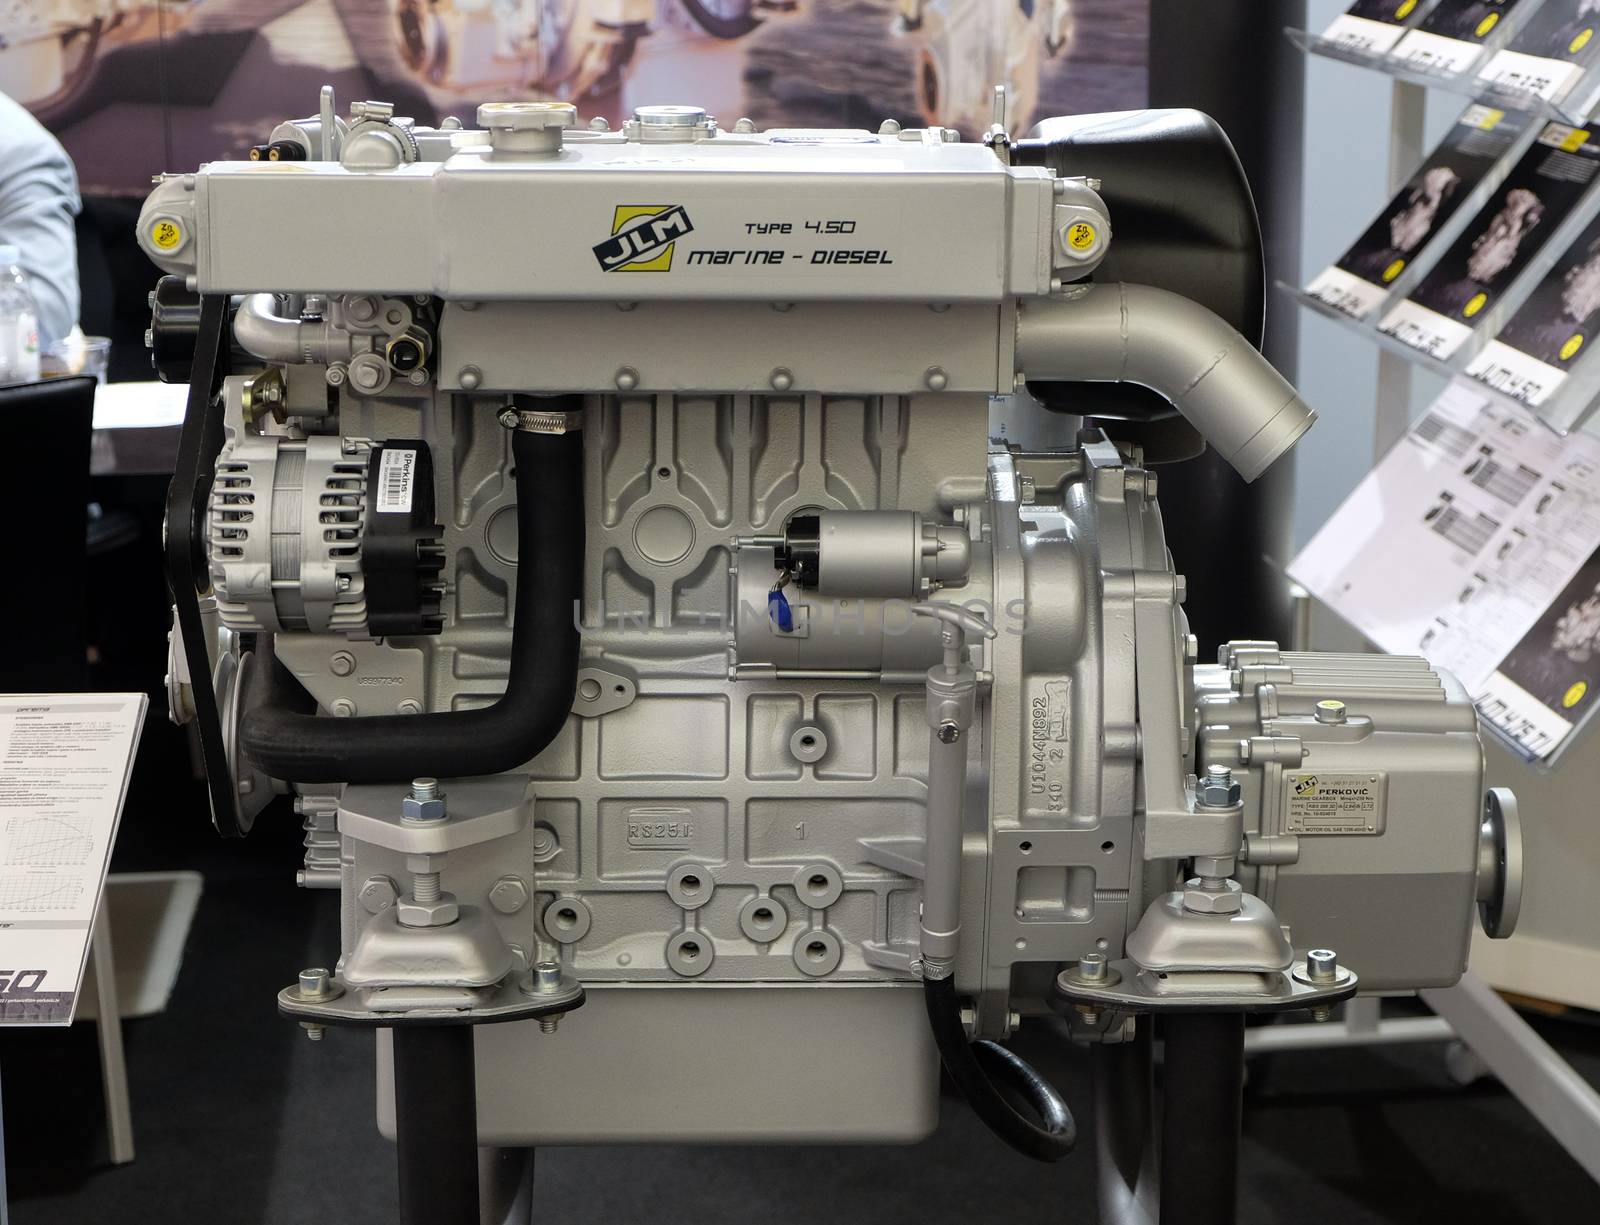 Modern engine used on marine industry exhibited at the Zagreb Boat Show, on February 20, 2015.